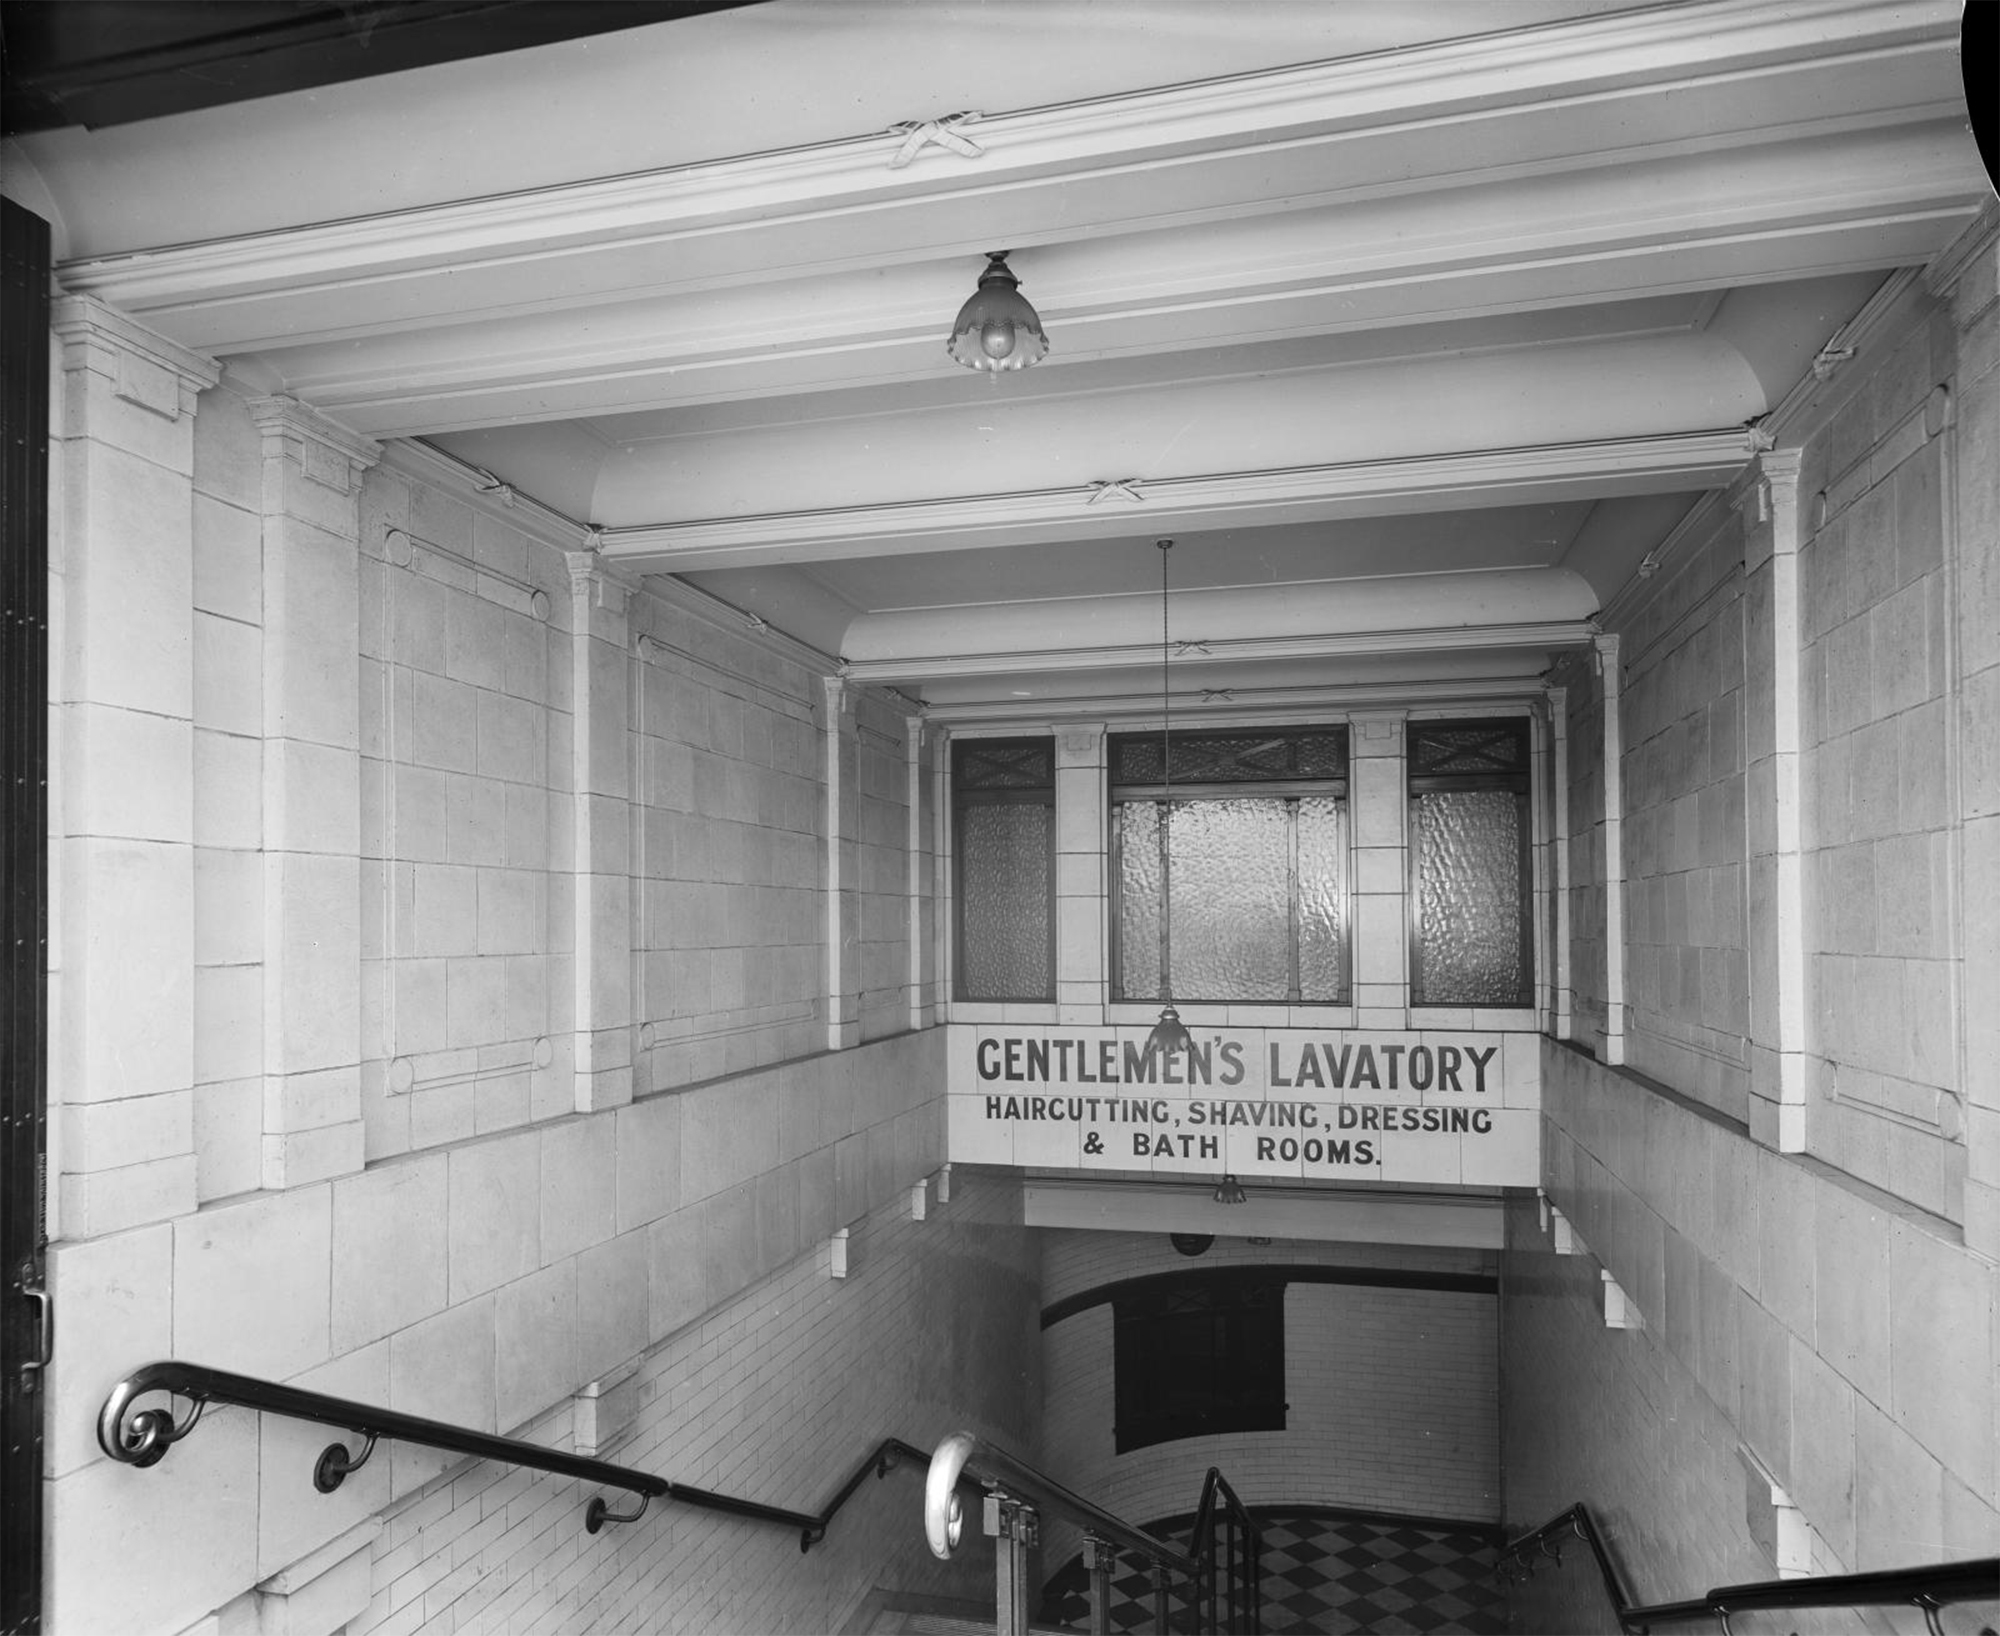 The view looking down a flight of stairs to subterranean gents' toilets. The walls are covered in white tiles.. A sign beneath a window, part way down the stairs reads: ‘GENTLEMEN’S LAVATORY, HAIRCUTTING, SHAVING, DRESSING & BATH ROOMS.’